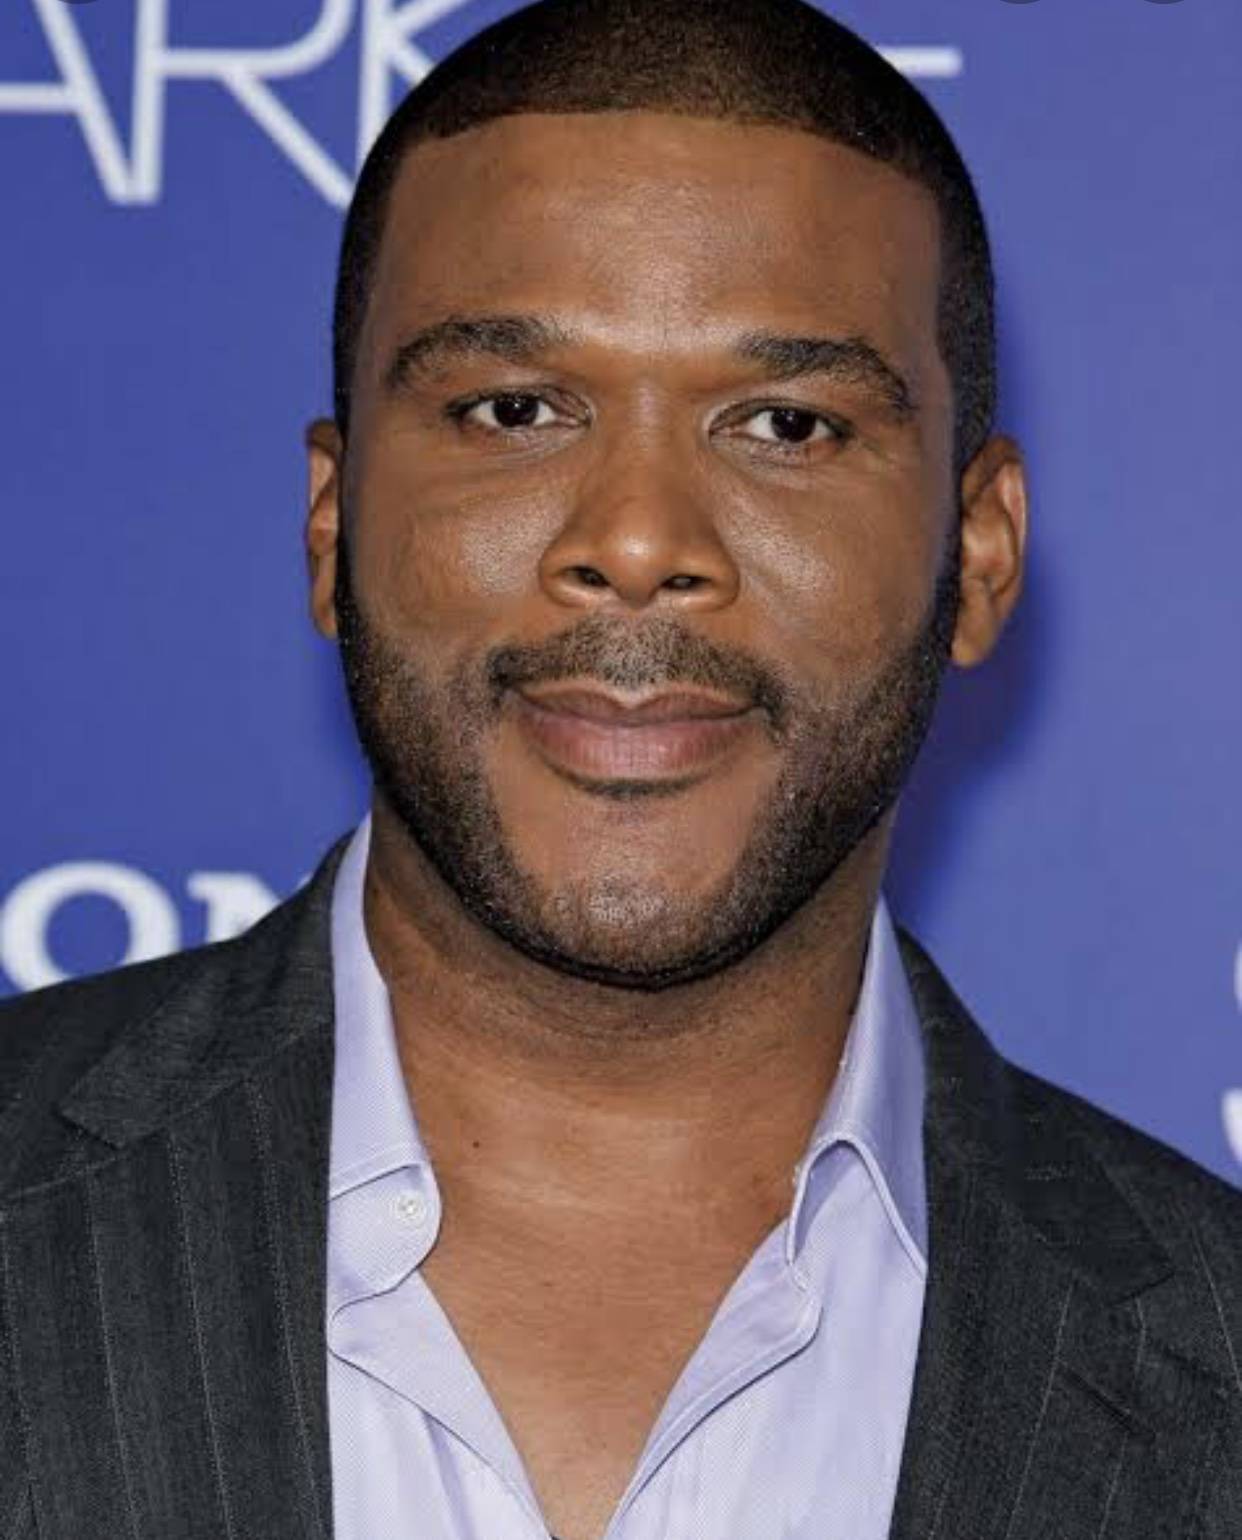 Tyler Perry Says Speaks to 'All of the Pains' Black People Have Endured